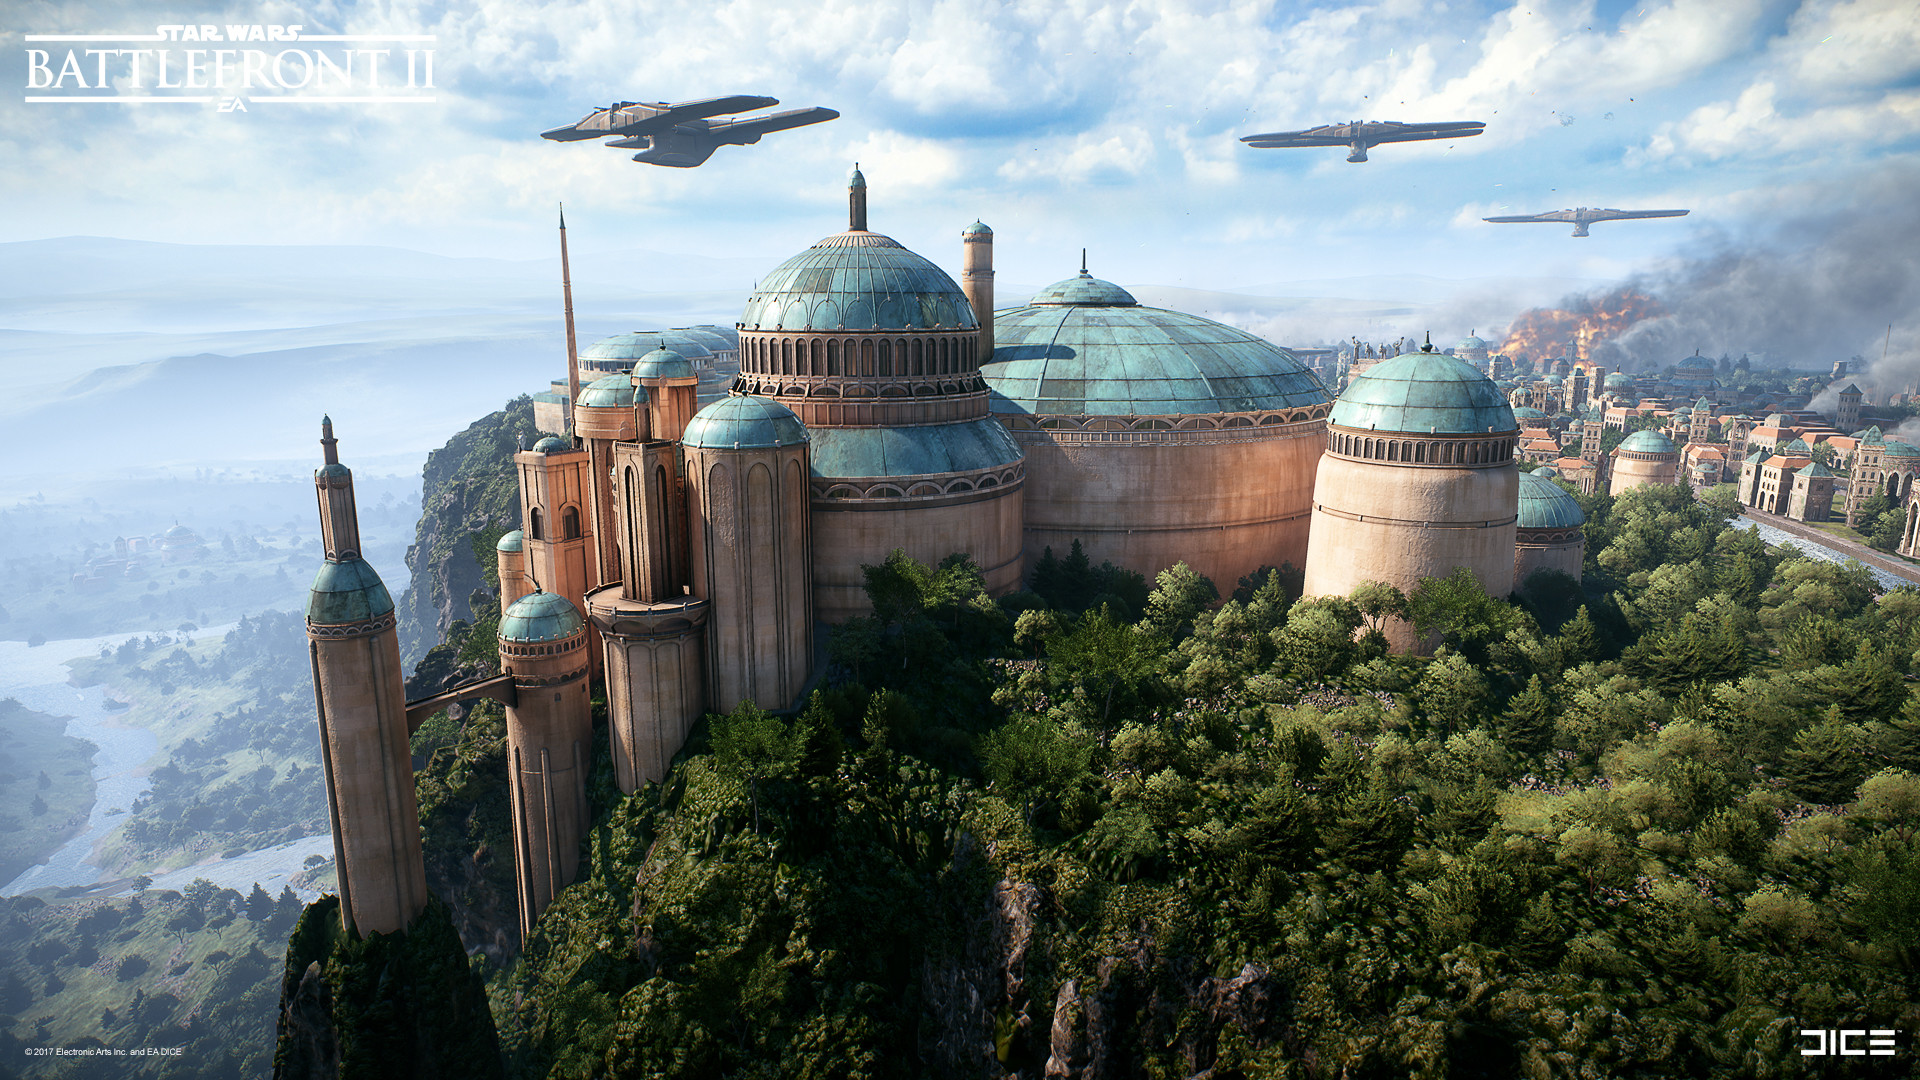 Naboo_Theed_-_Royal_Palace_(1)_-_Mikael_Andersson_DICE.jpg